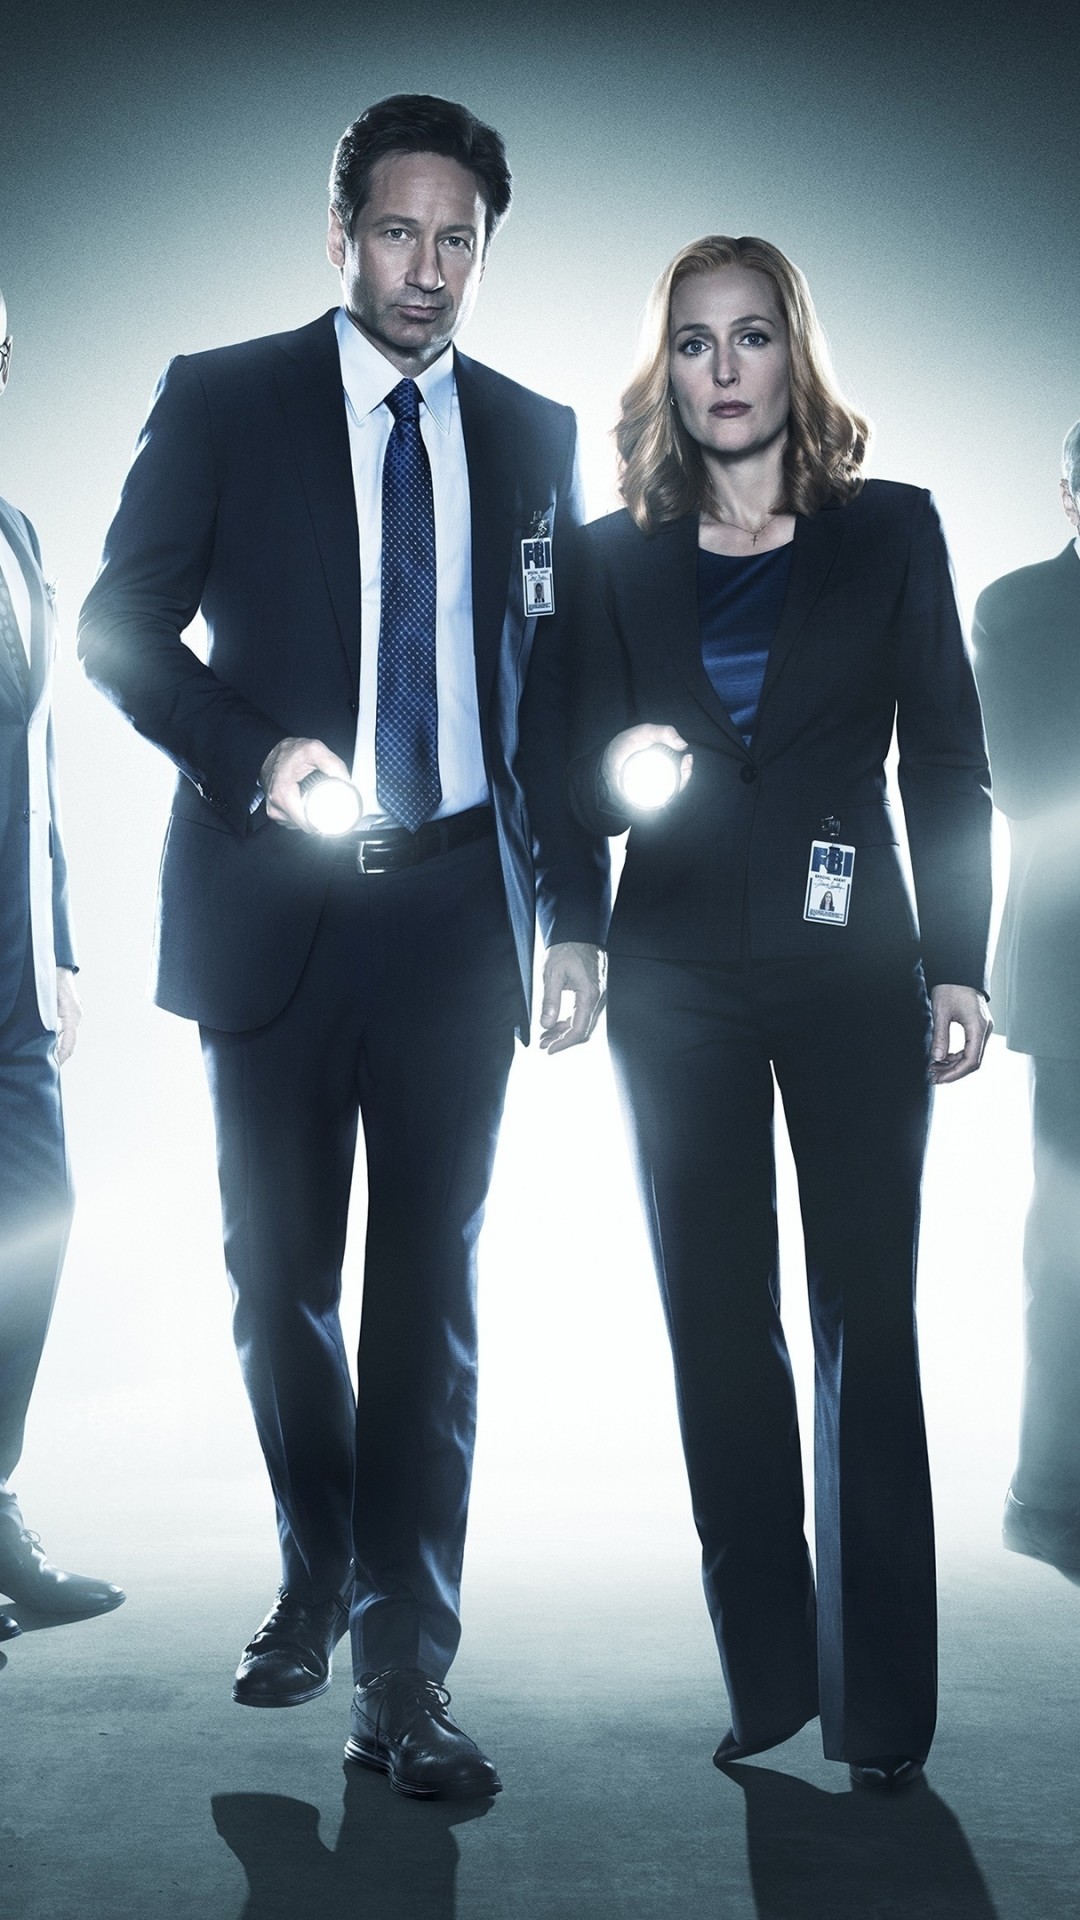 1080x1920 The X Files Wallpapers Wallpapers) – HD Wallpapers